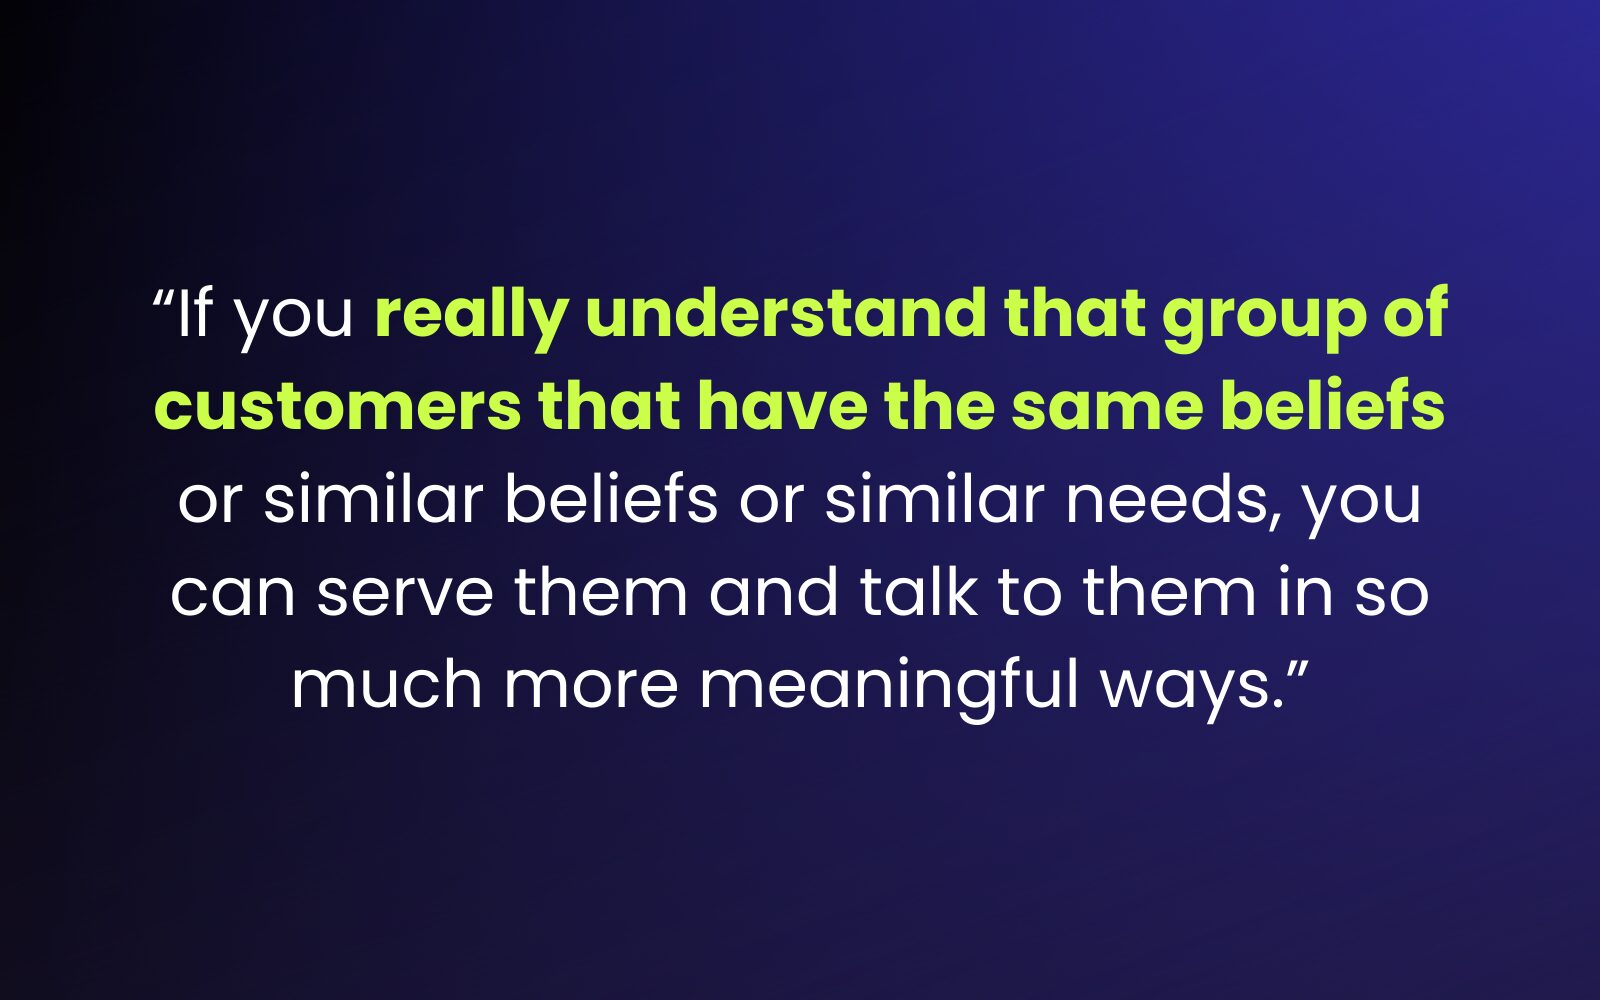  “If you really understand that group of customers that have the same beliefs or similar beliefs or similar needs, you can serve them and talk to them in so much more meaningful ways.” How to Build Brand Loyalty